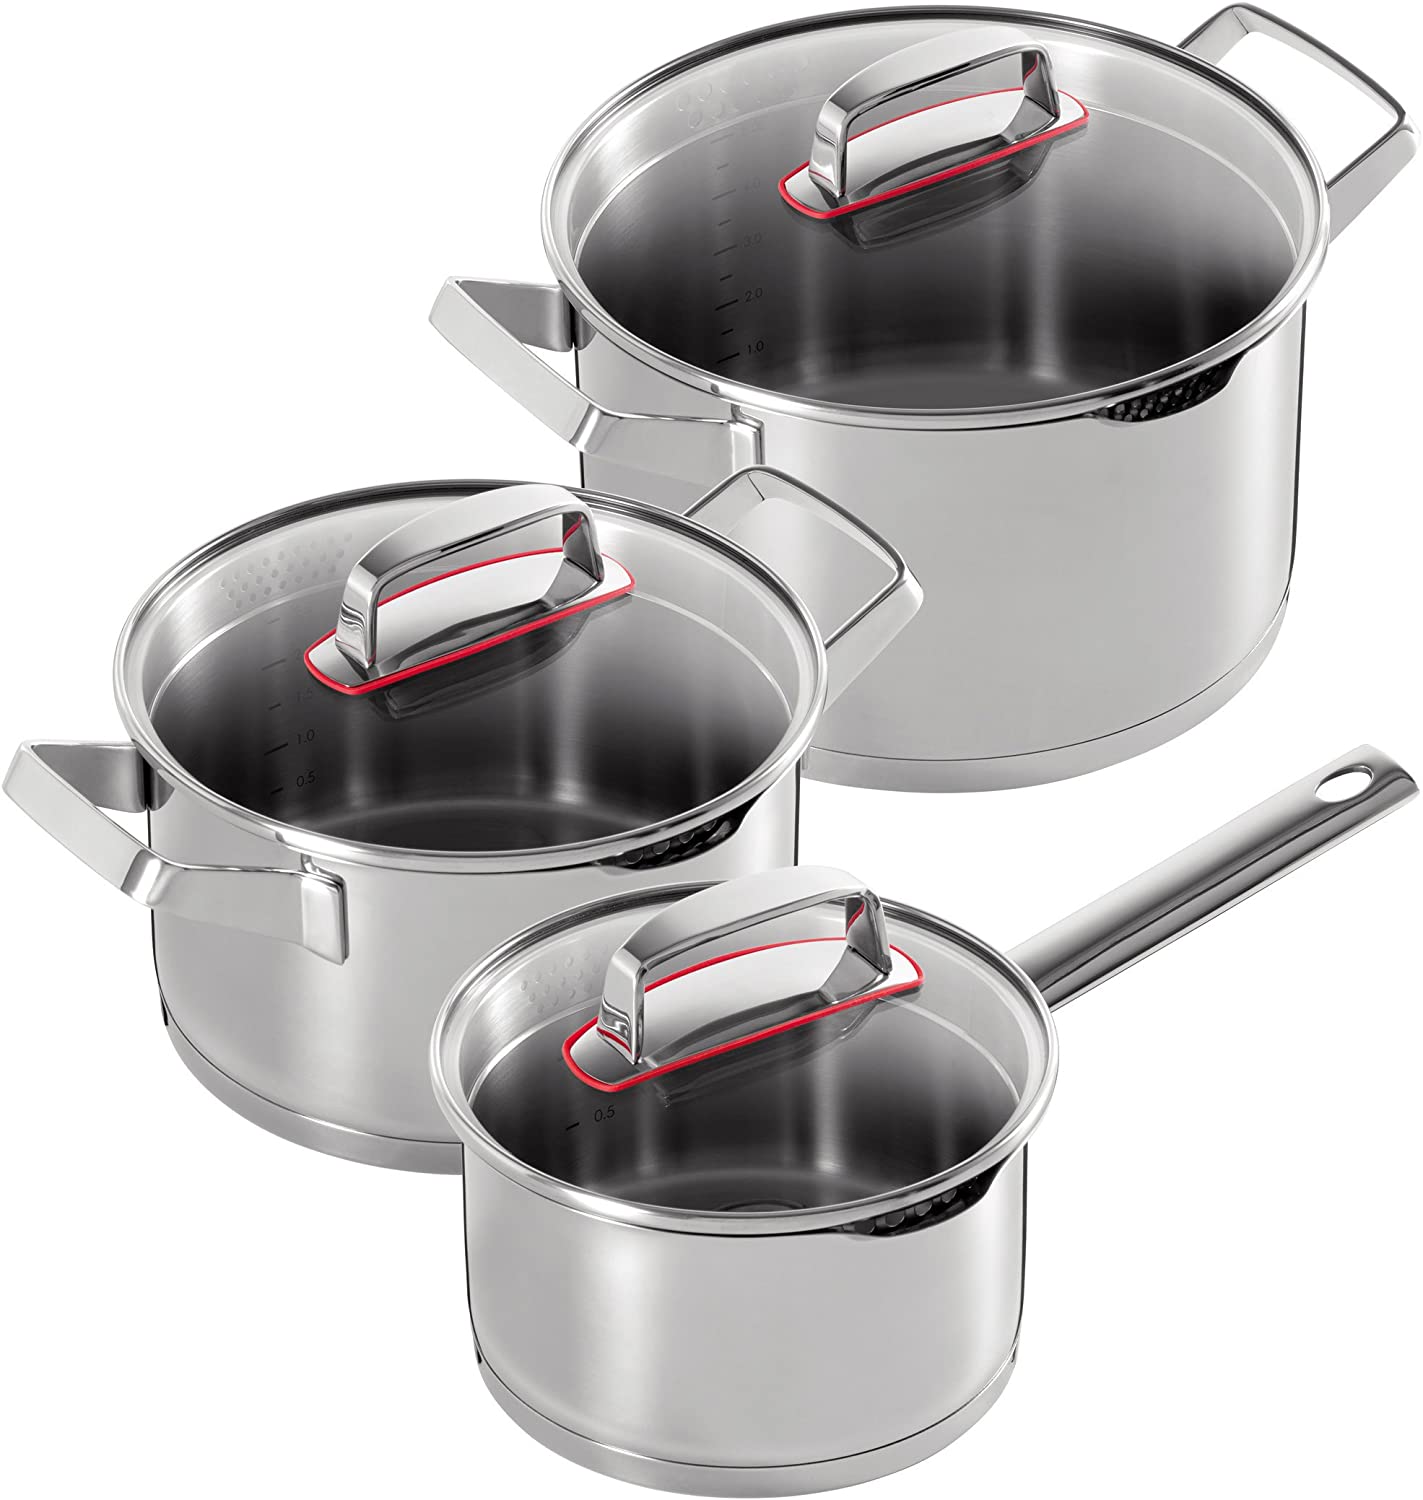 Kuhn Rikon Daily Cookware Set, 3pcs., Casserole with Handle, Cooking Pot, with Lid, Stainless Steel, Ø 16, 20, 24 cm, 37273